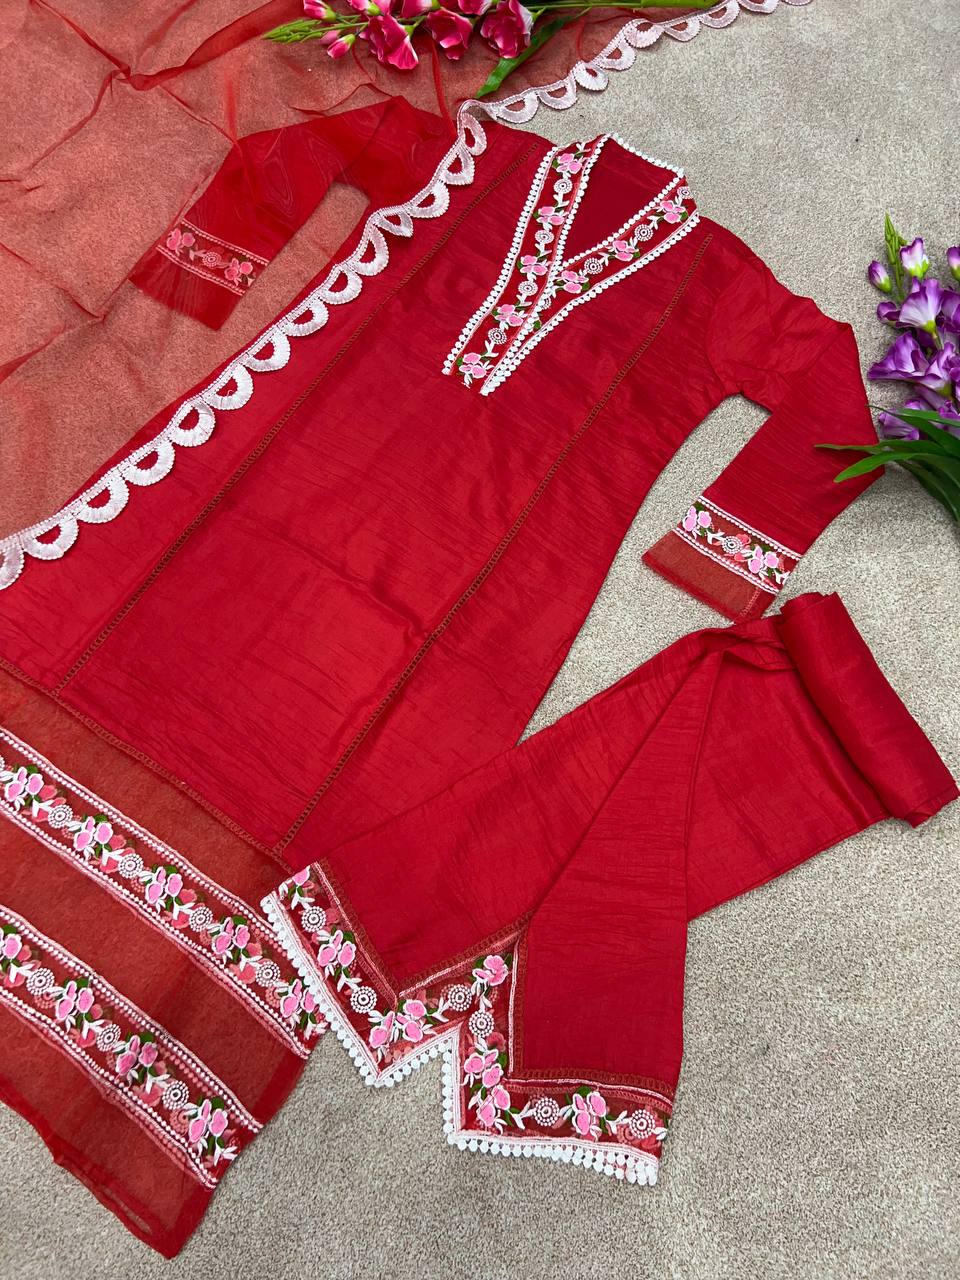 Red Salwar Suit In Soft Maska Cotton Silk With Embroidery Work